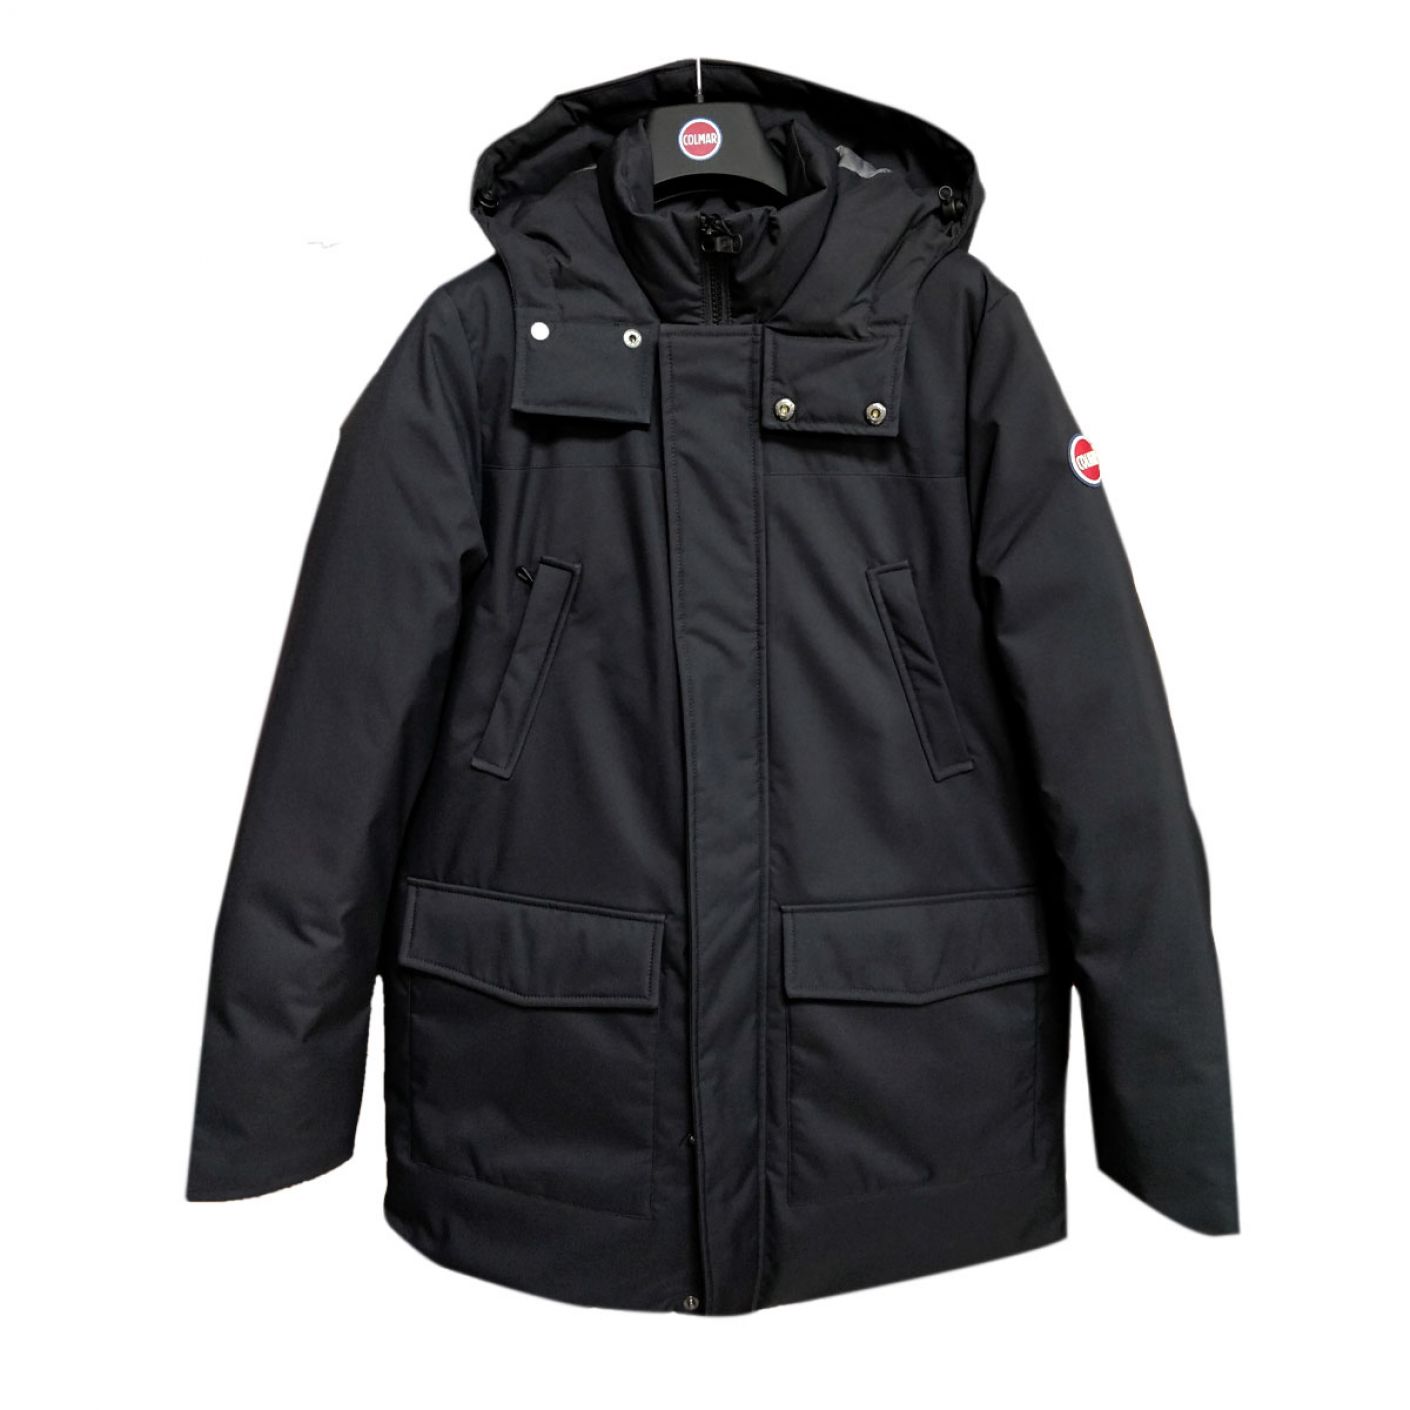 Colmar Long Jacket with Pockets Black for Boys